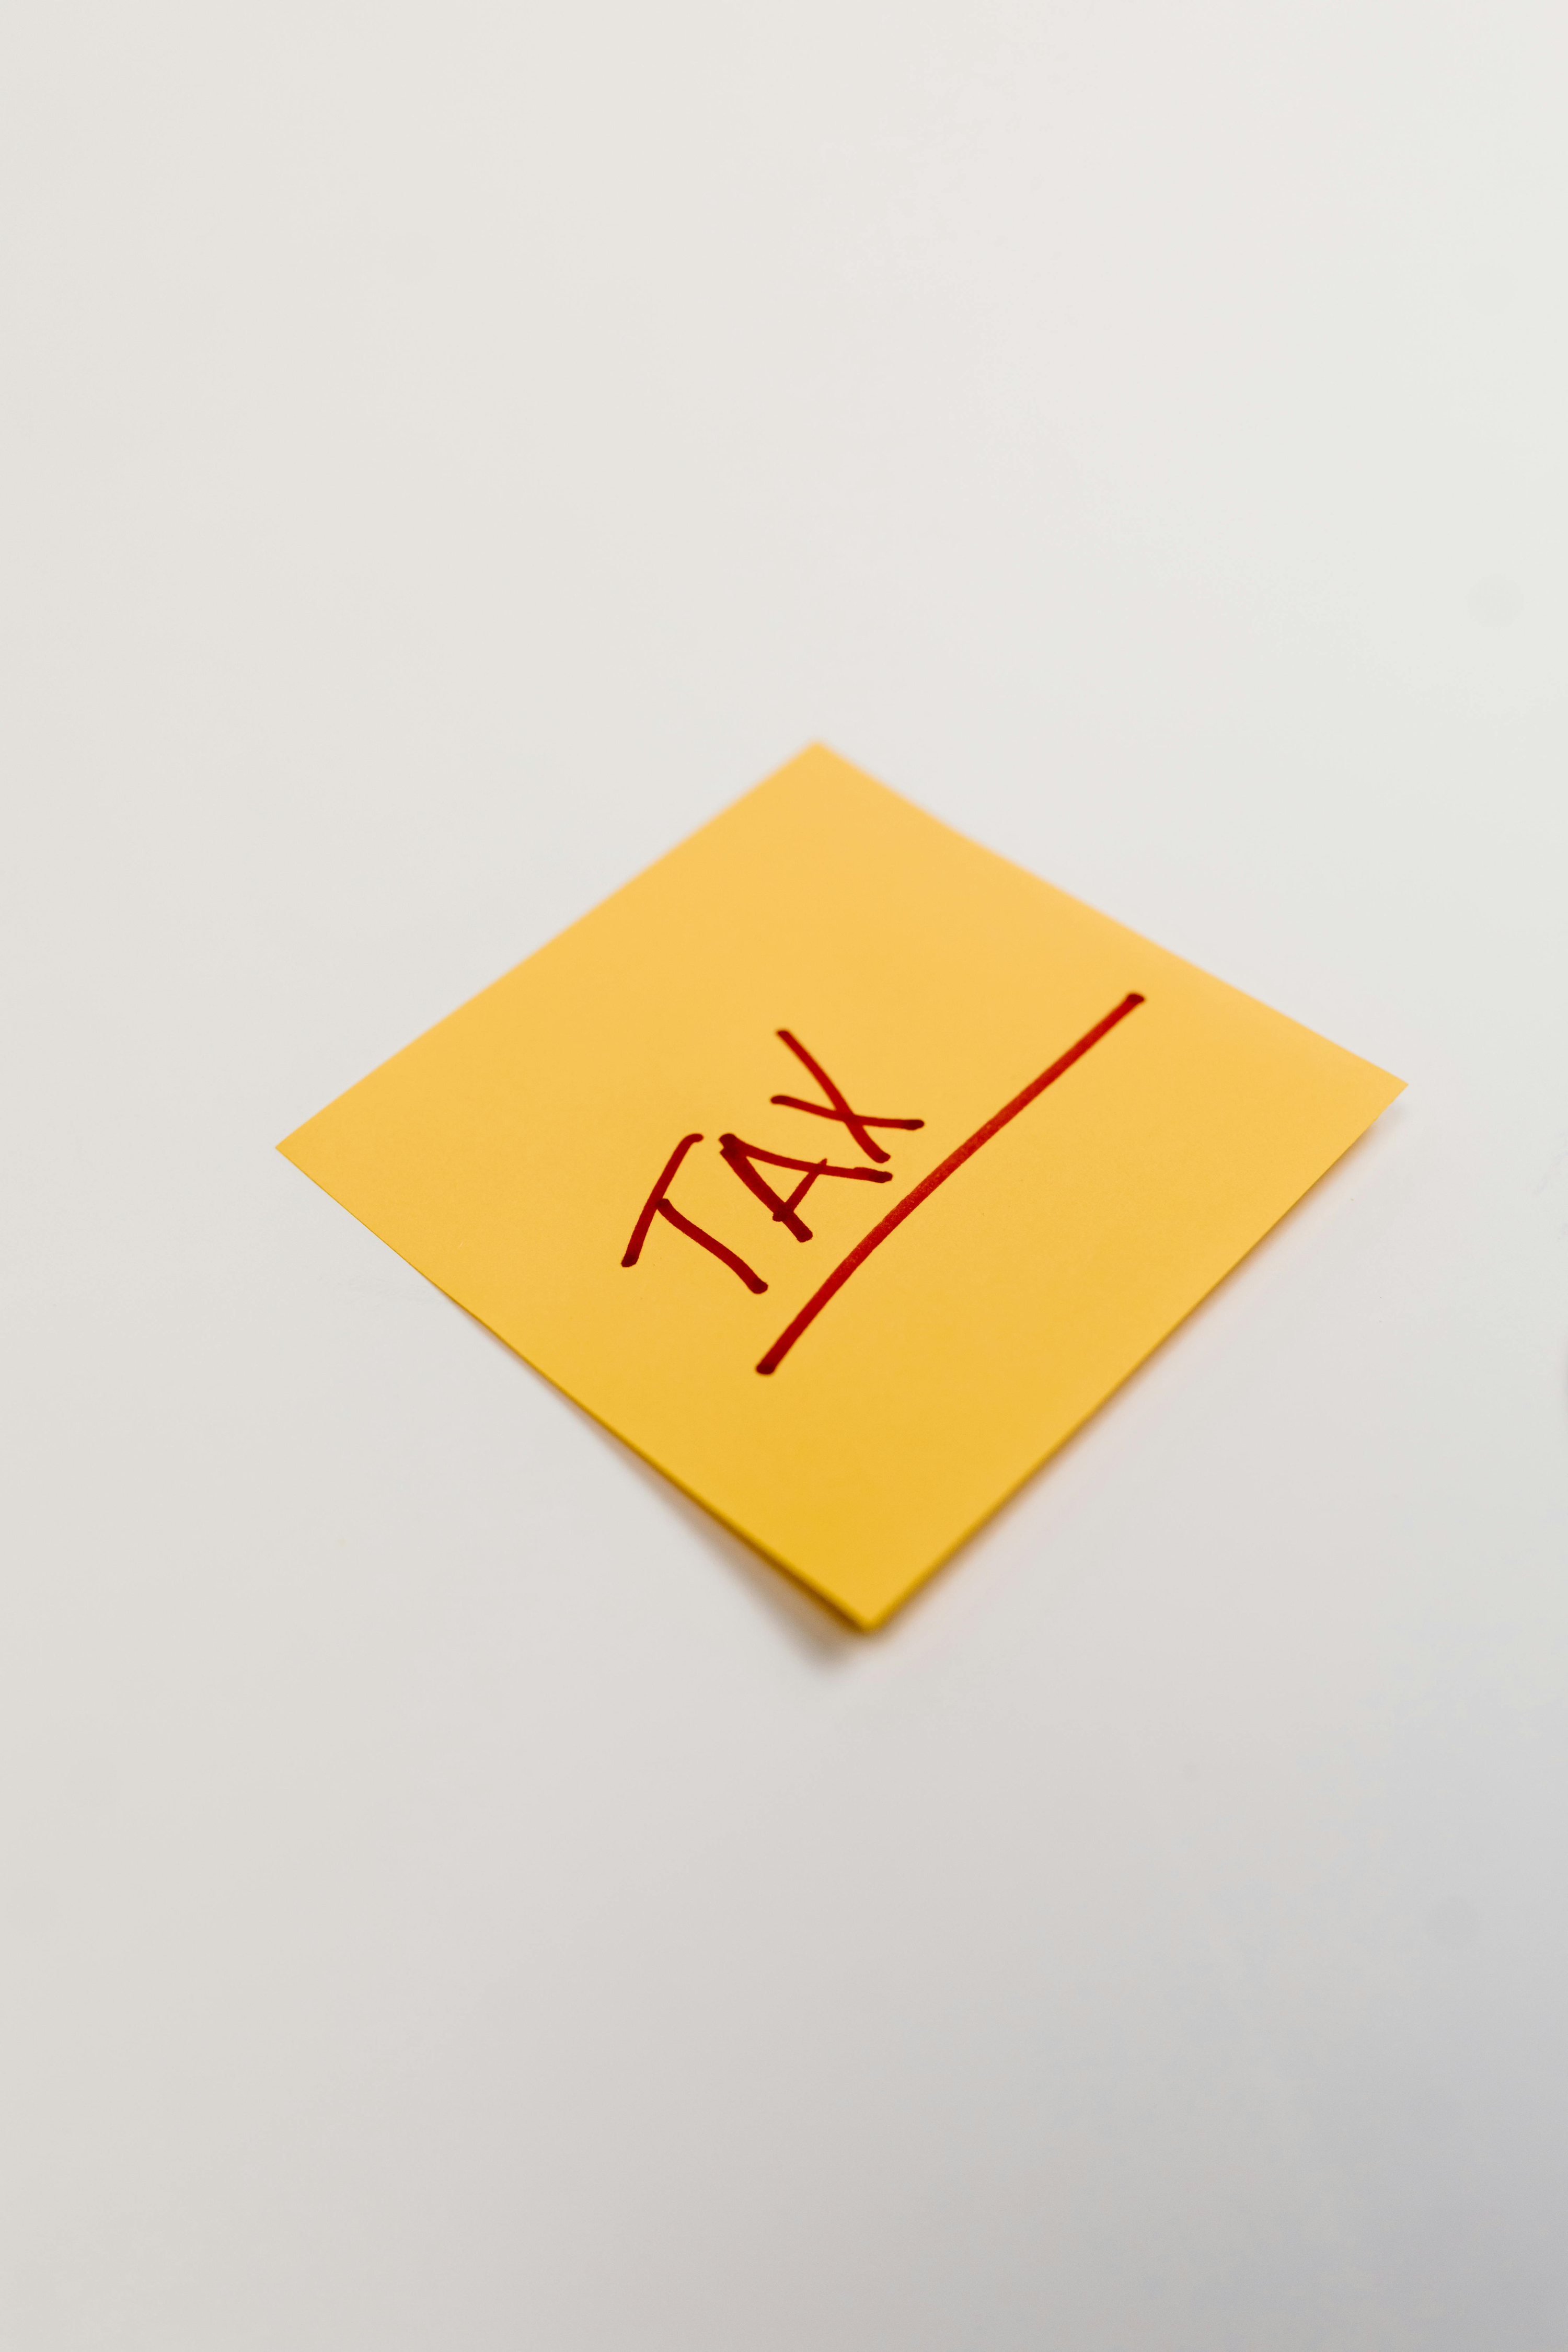 A registered CPA answers all of your questions as tax season approaches